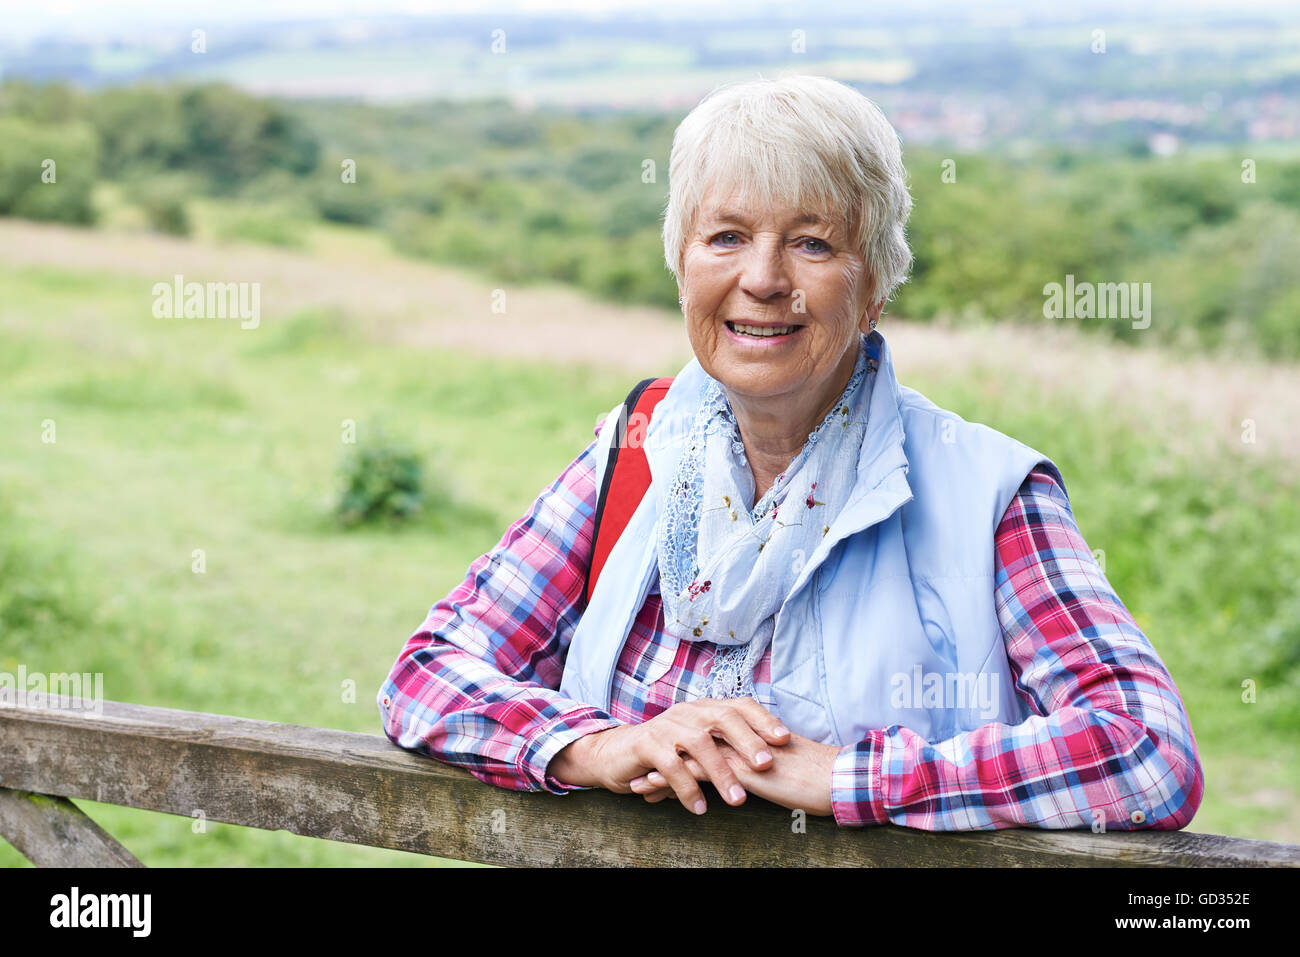 Portrait of Senior Woman Hiking in Countryside Banque D'Images